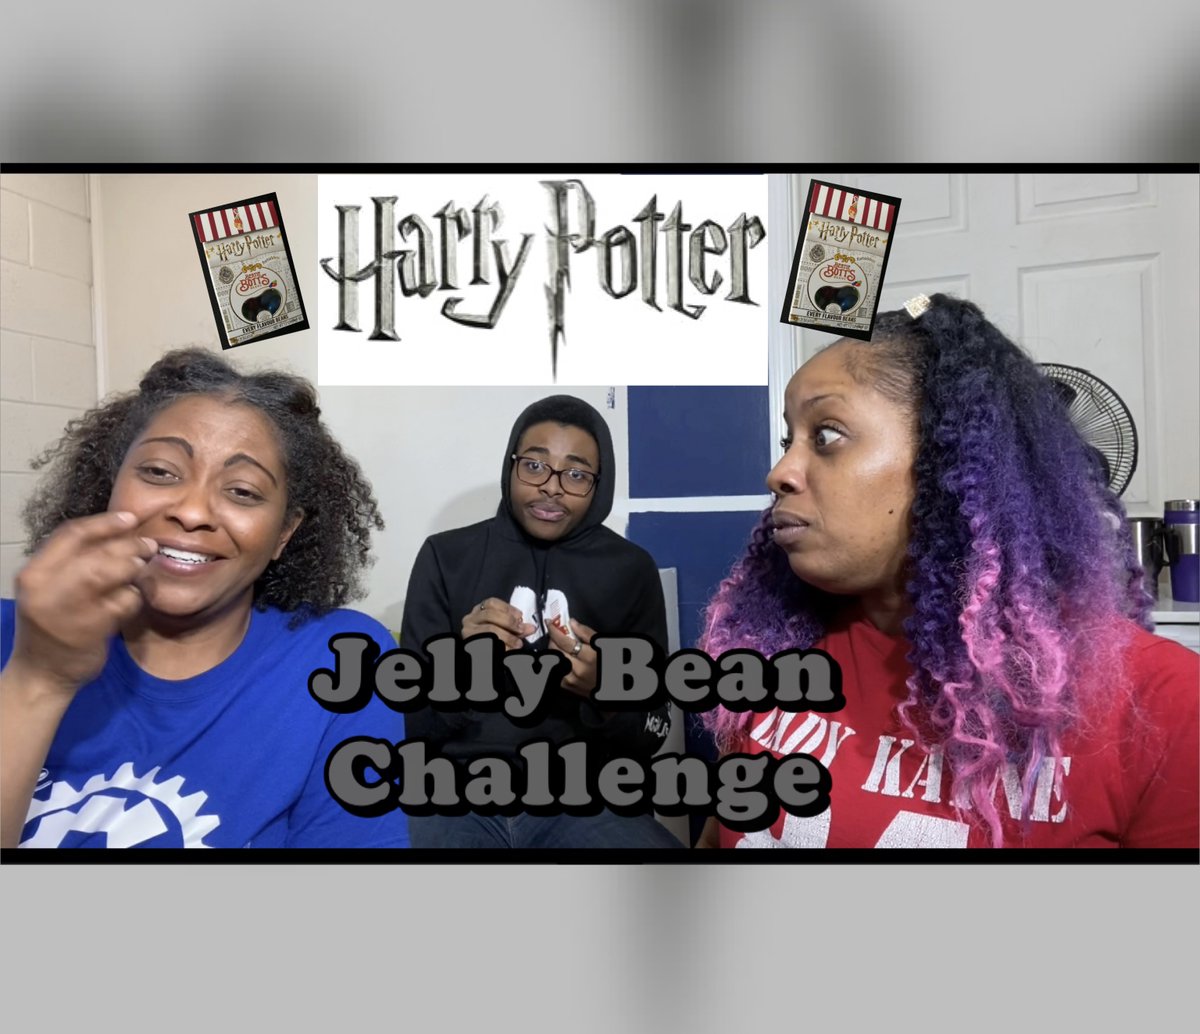 🍬🍭🍯
New #MajorShenanigans candy review:
'Jelly Belly Harry Potter Jellybeans'
Ft @LadyKayne @MJKaneBooks @2kautious20
Full video on @YouTube
youtu.be/KtSFa1C9HWA

#candyreview #harrypotterjellybeans #jellybelly